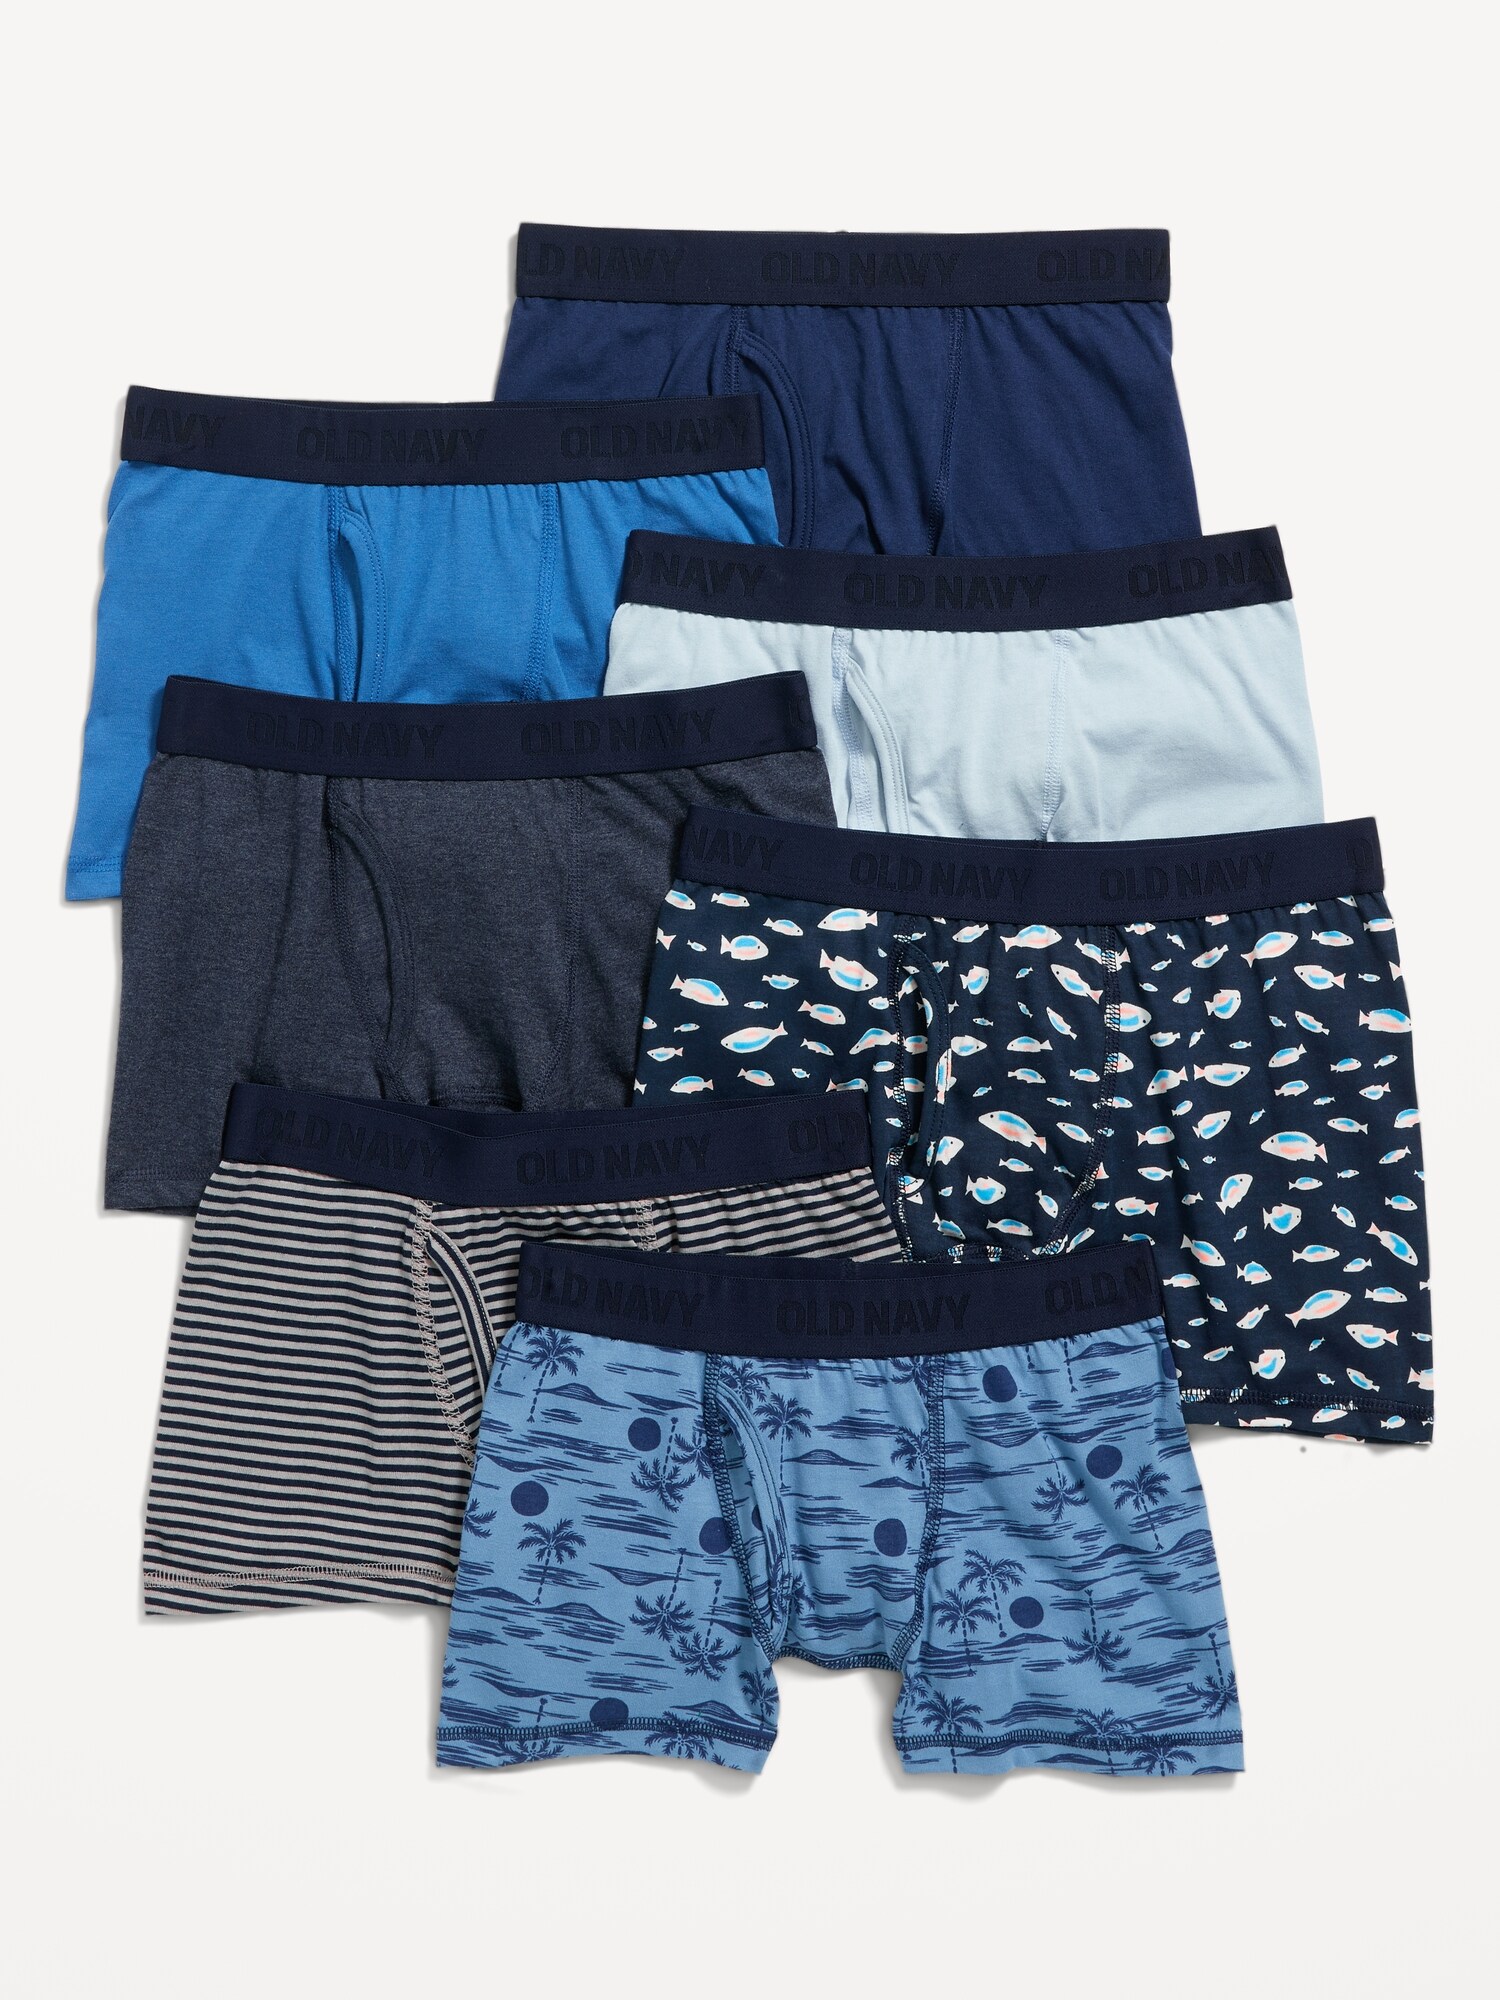 Old Navy - Printed Boxer-Briefs Underwear 7-Pack for Boys blue